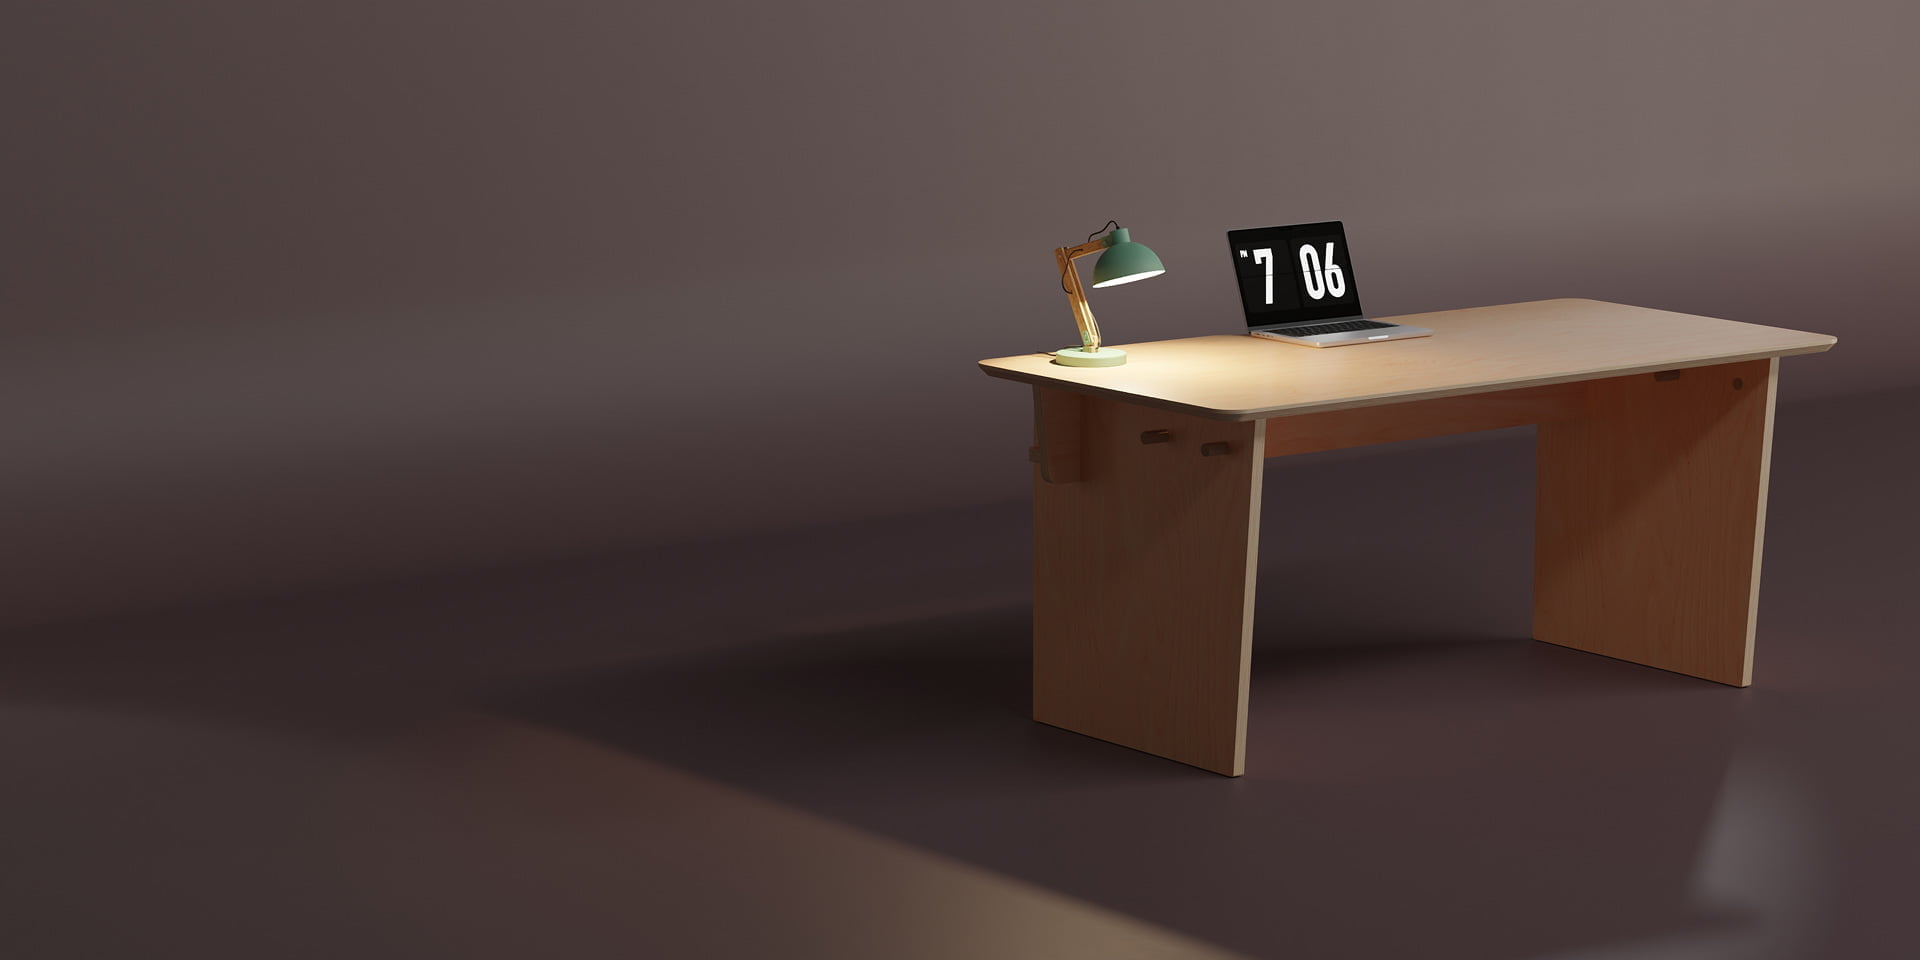 The Ecosium Big desk made from sustainable timber in Australia sitting on a mauve background with a green desk lamp and an Apple laptop